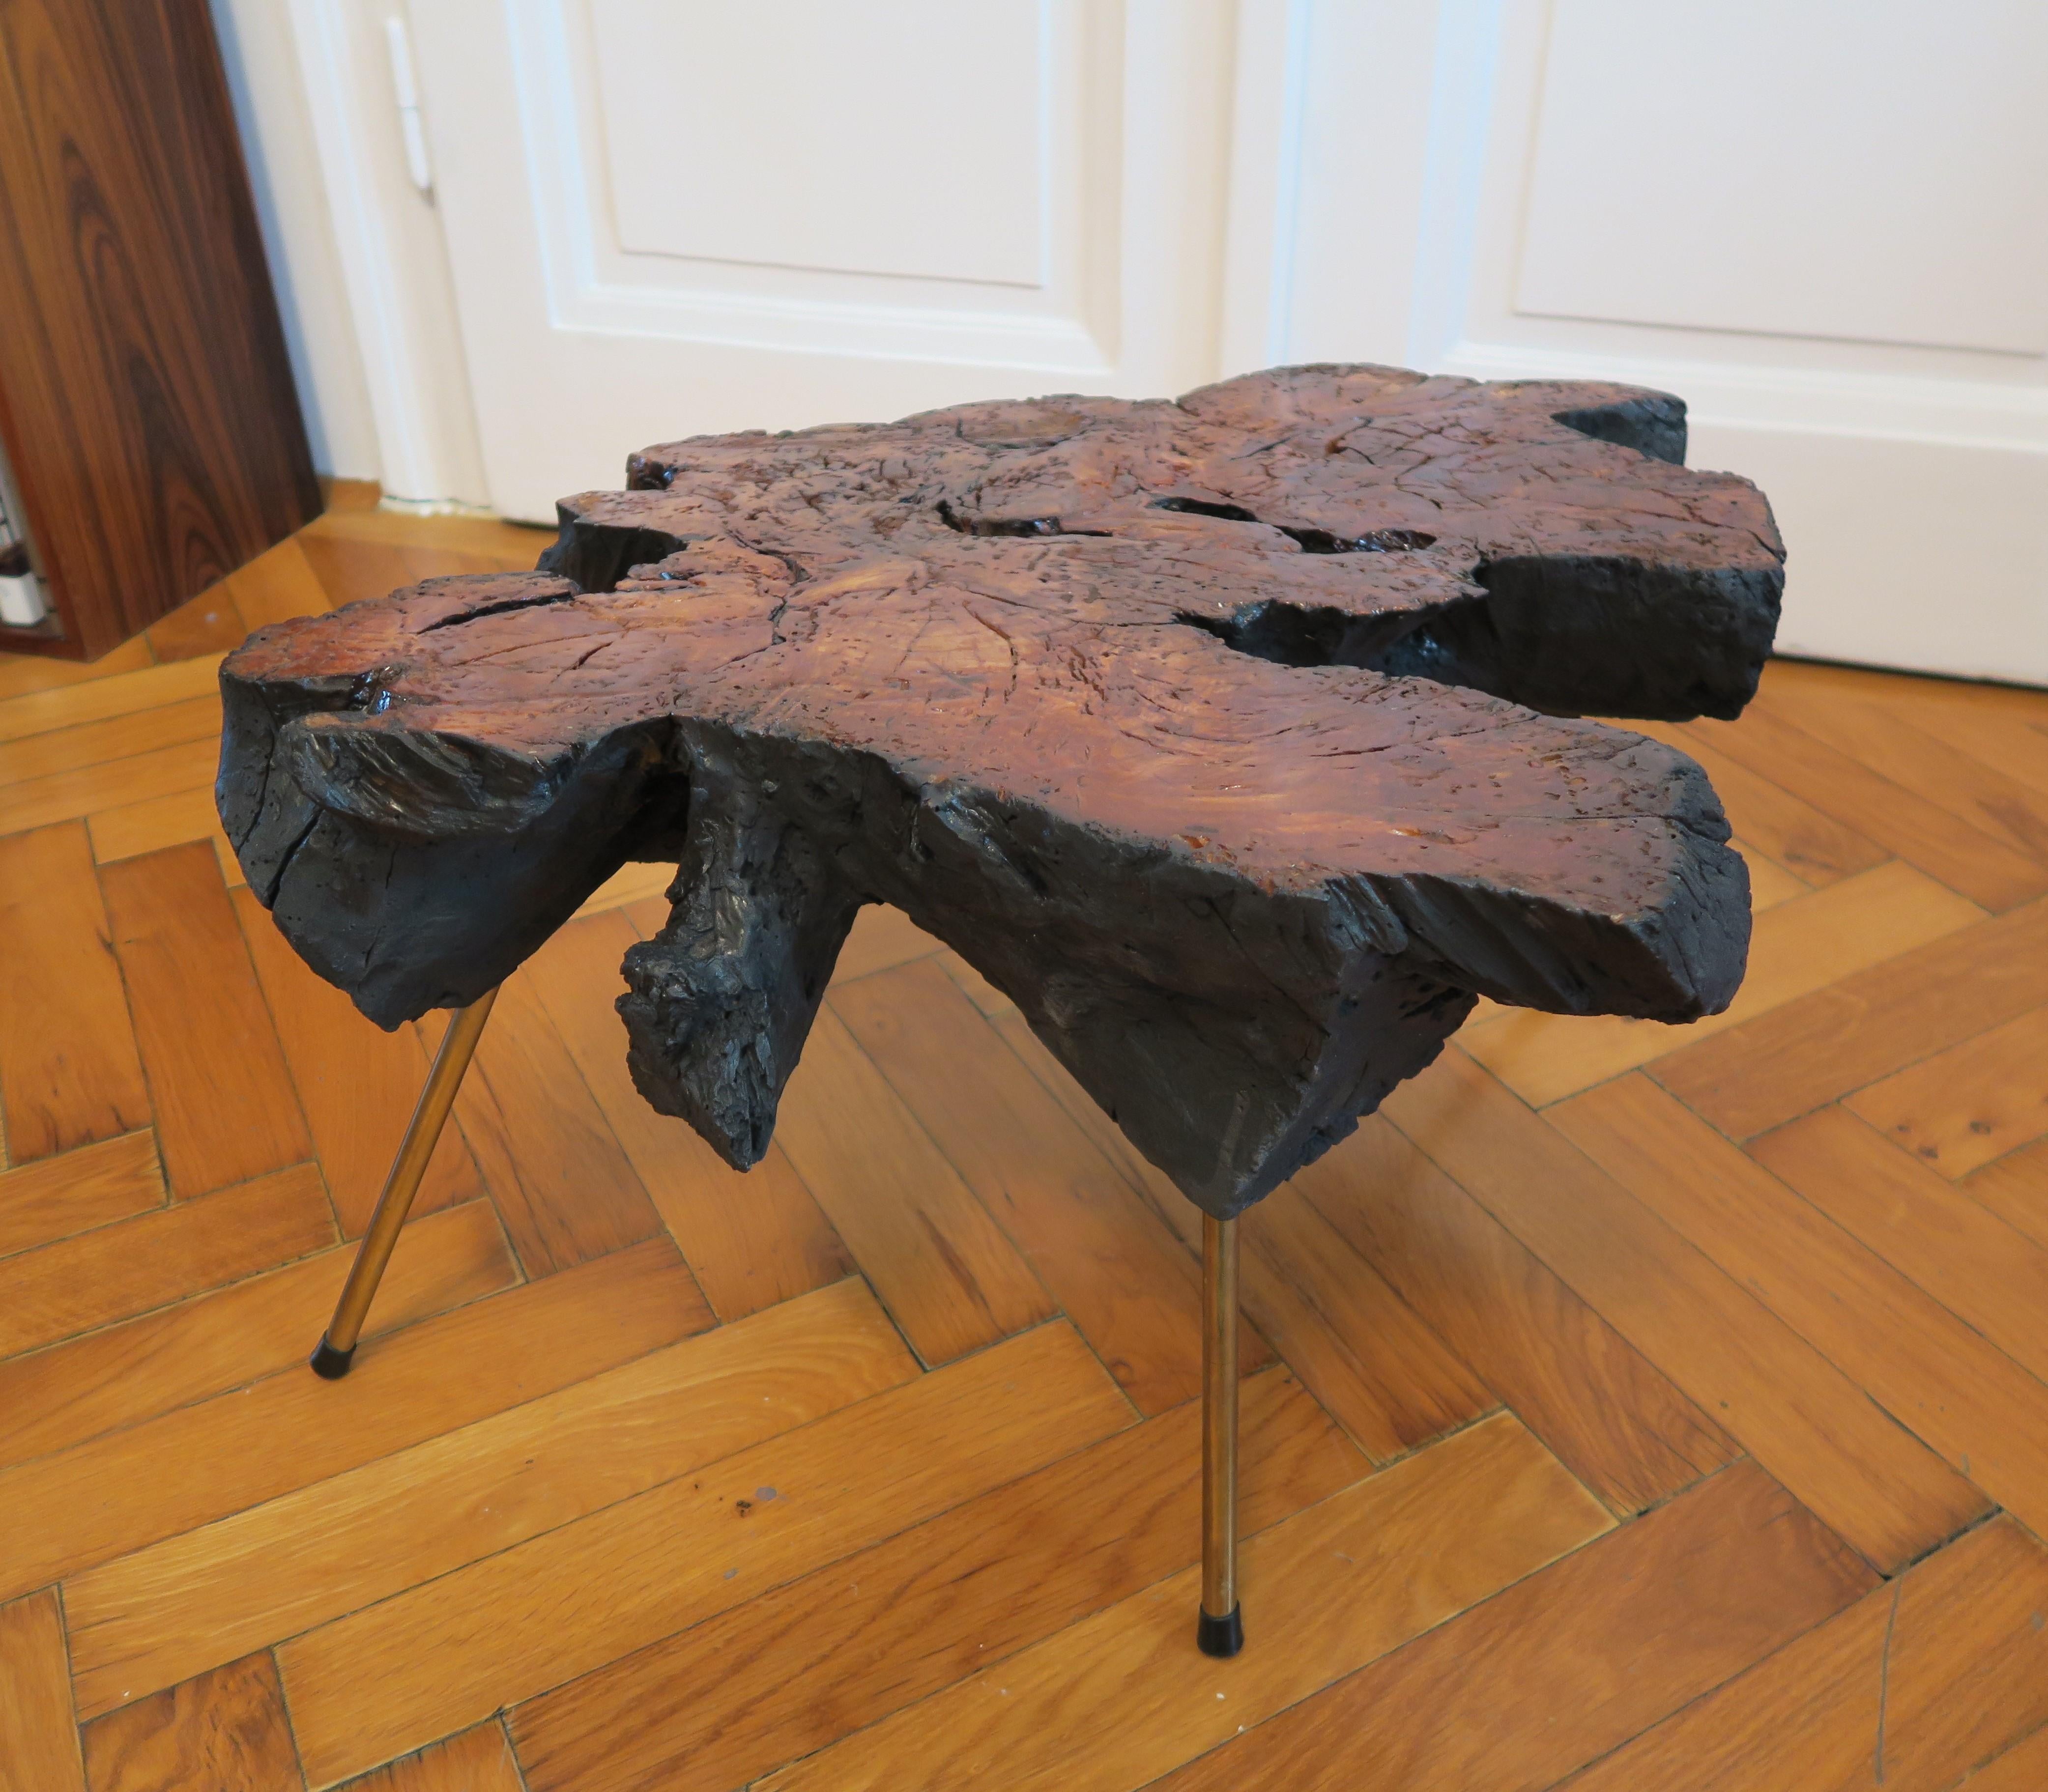 Eccentric side table in the style of Carl Auböcks famous 